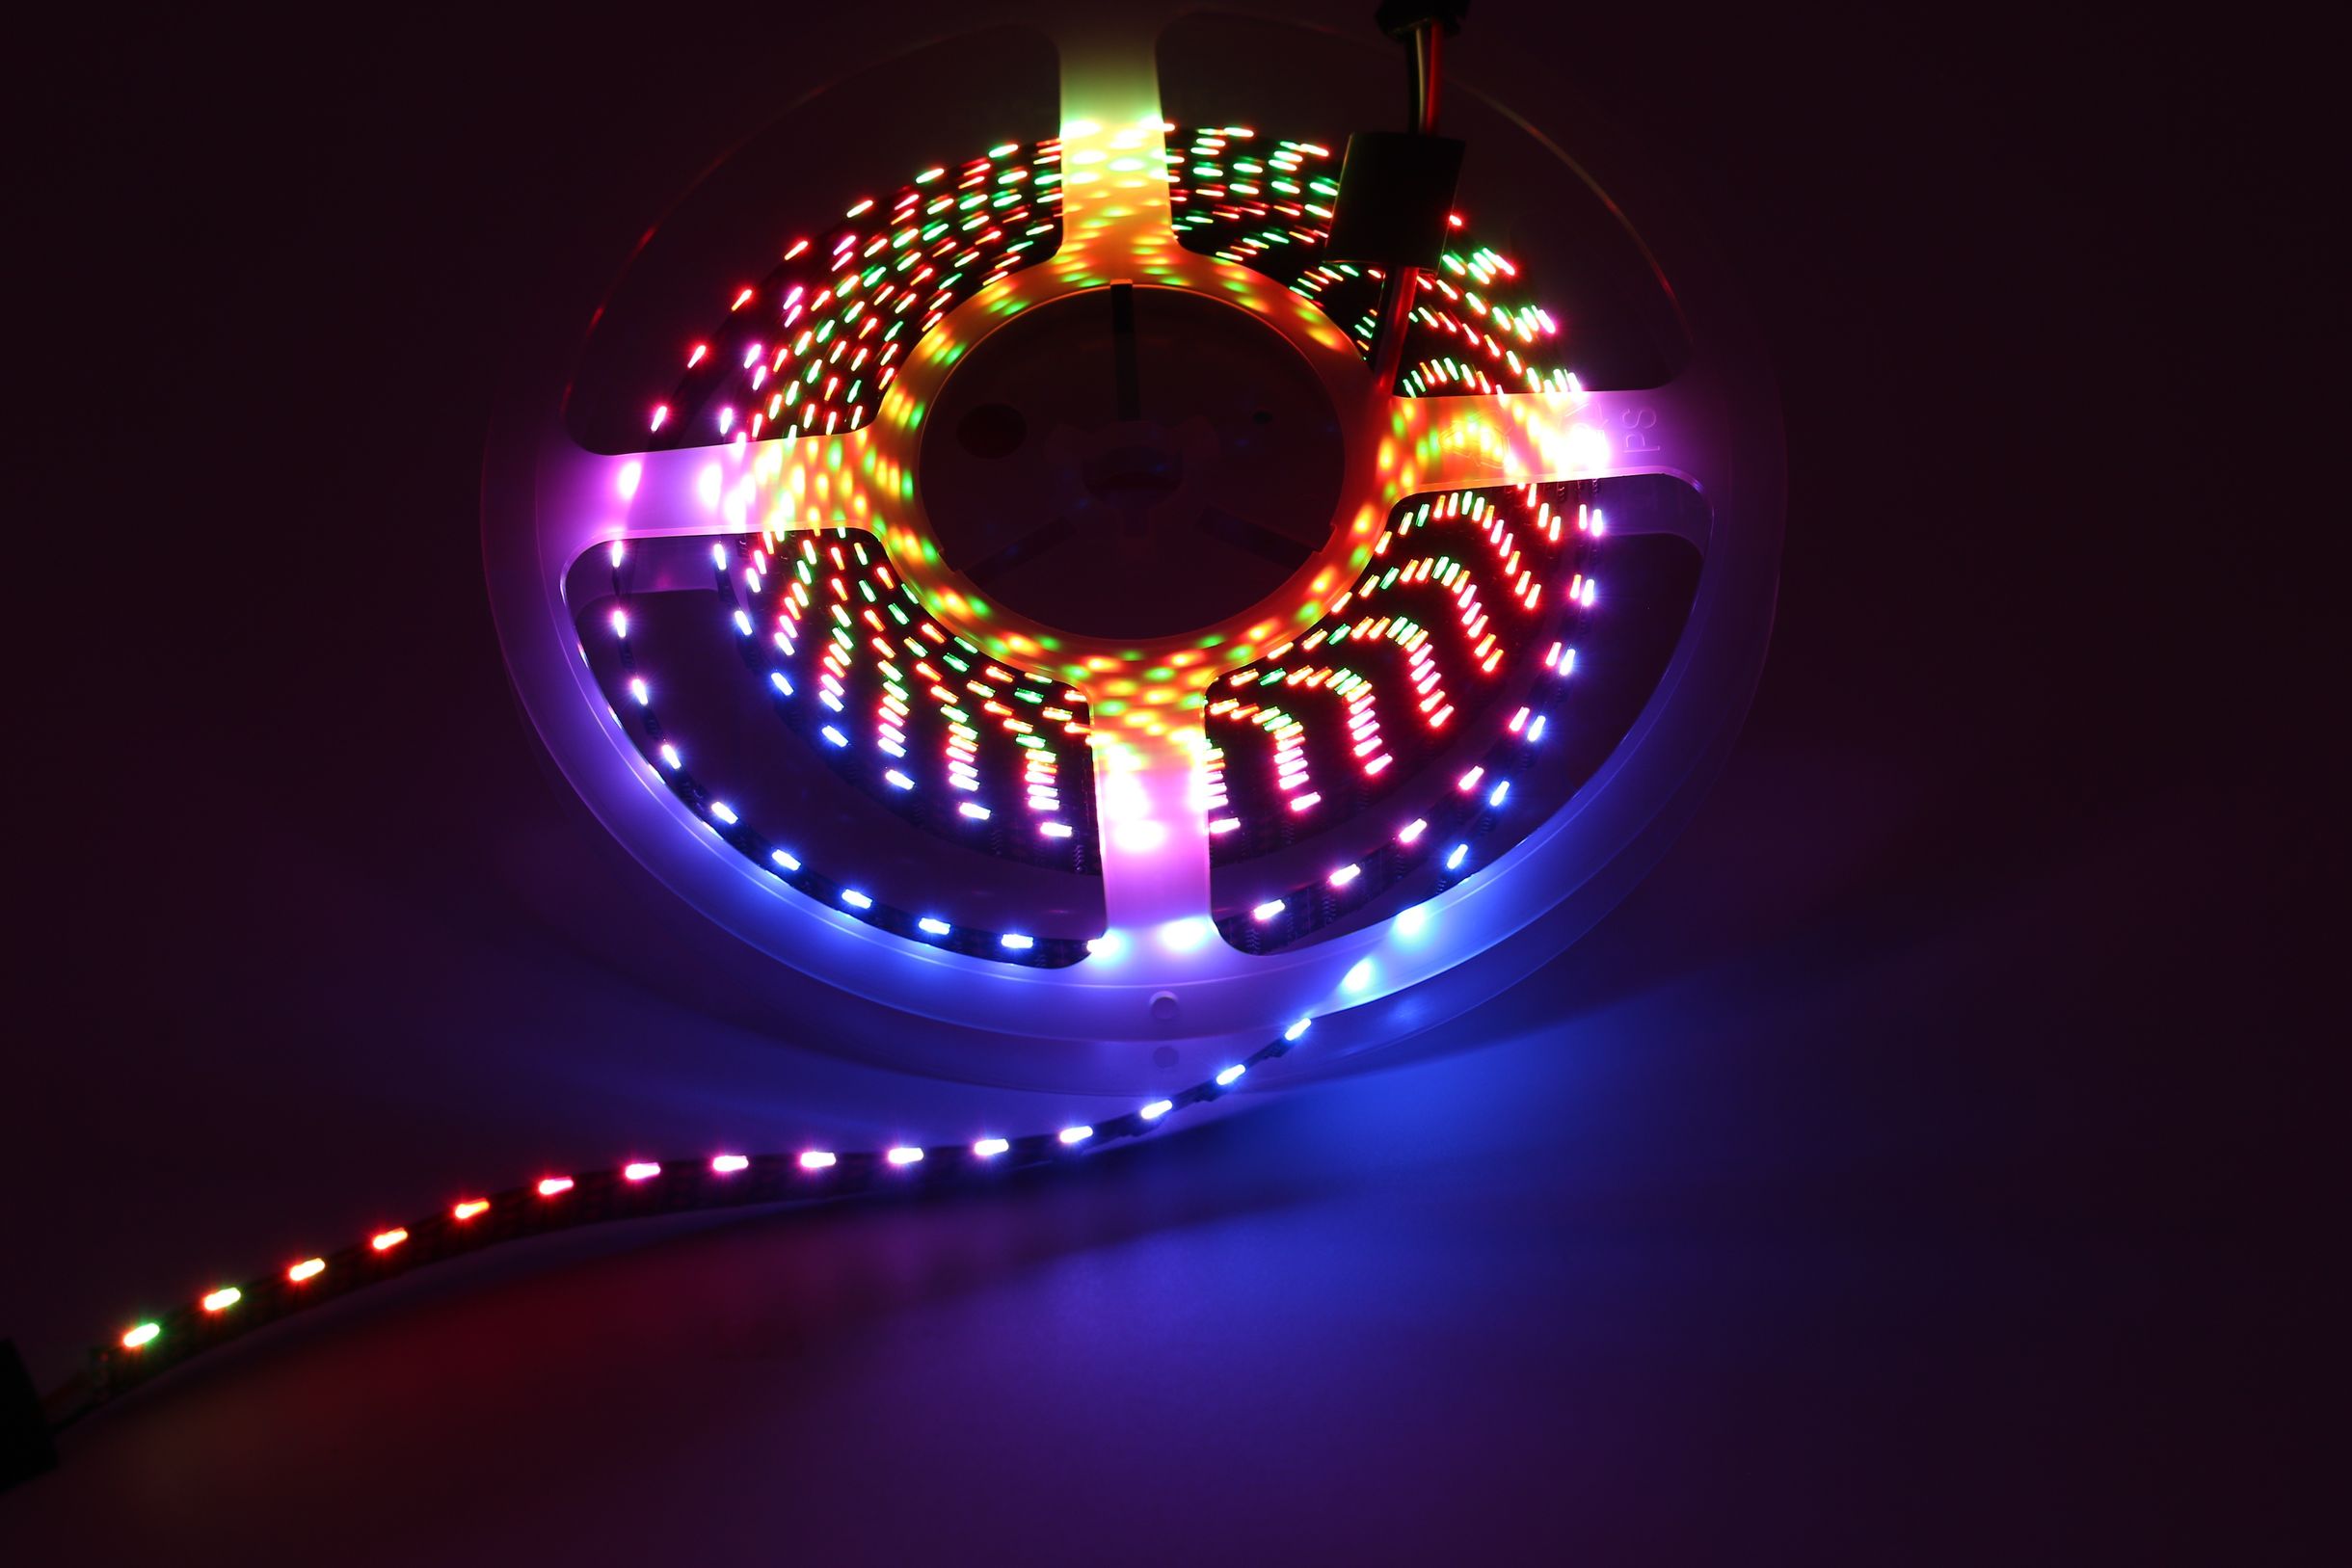 Dithering & Gamma Correction illustrated on LED pixel light string